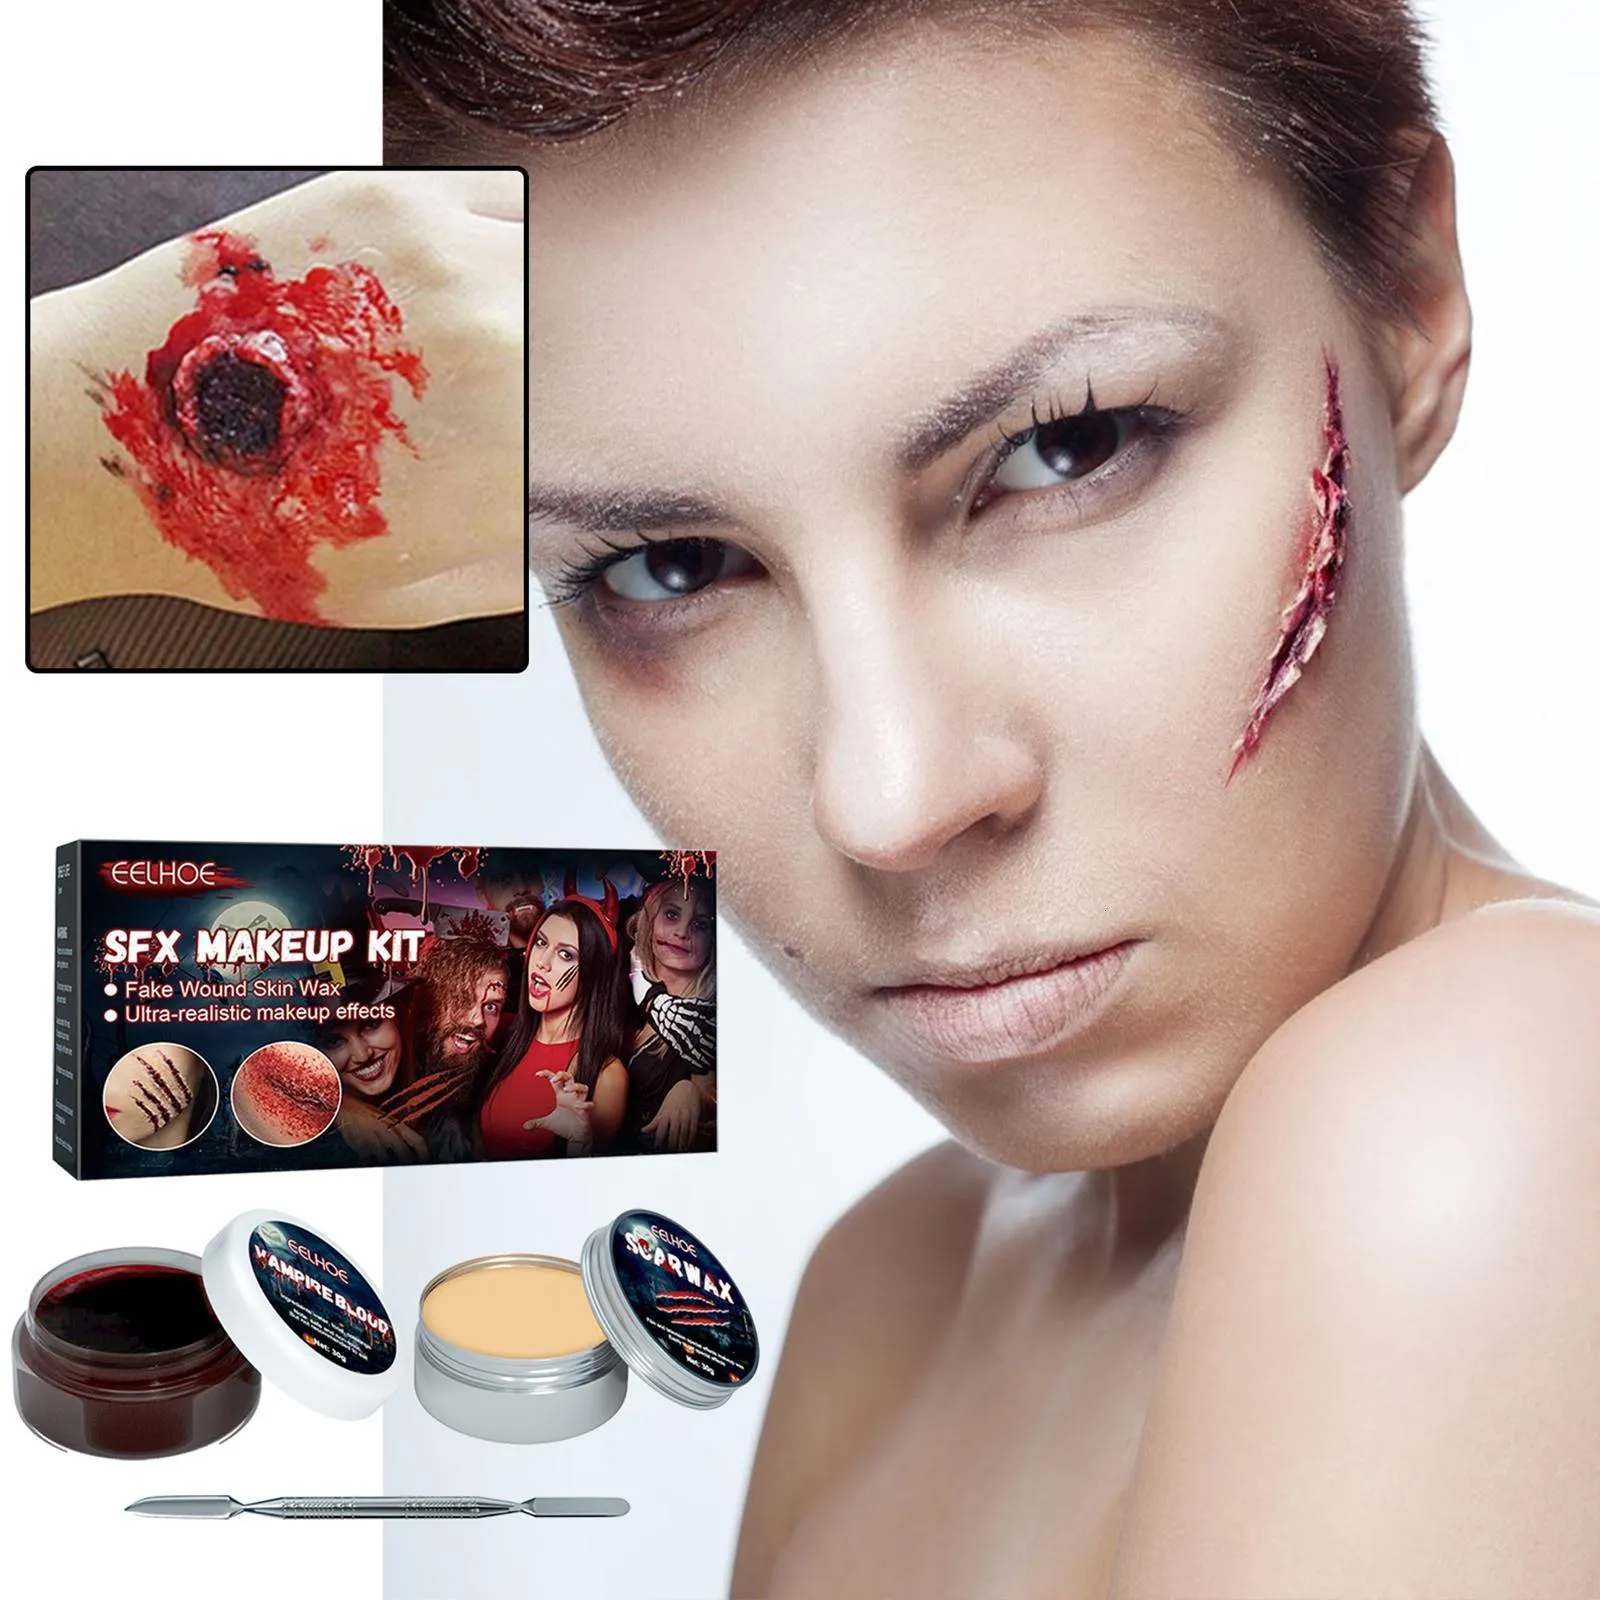 SFX Makeup Kit Wax Body Painting 2022 For Halloween And Stage Effects With  Spatula, Stipple, Sponge, And Wood Drop Fake Wound Skin 230815 From Fan04,  $12.09